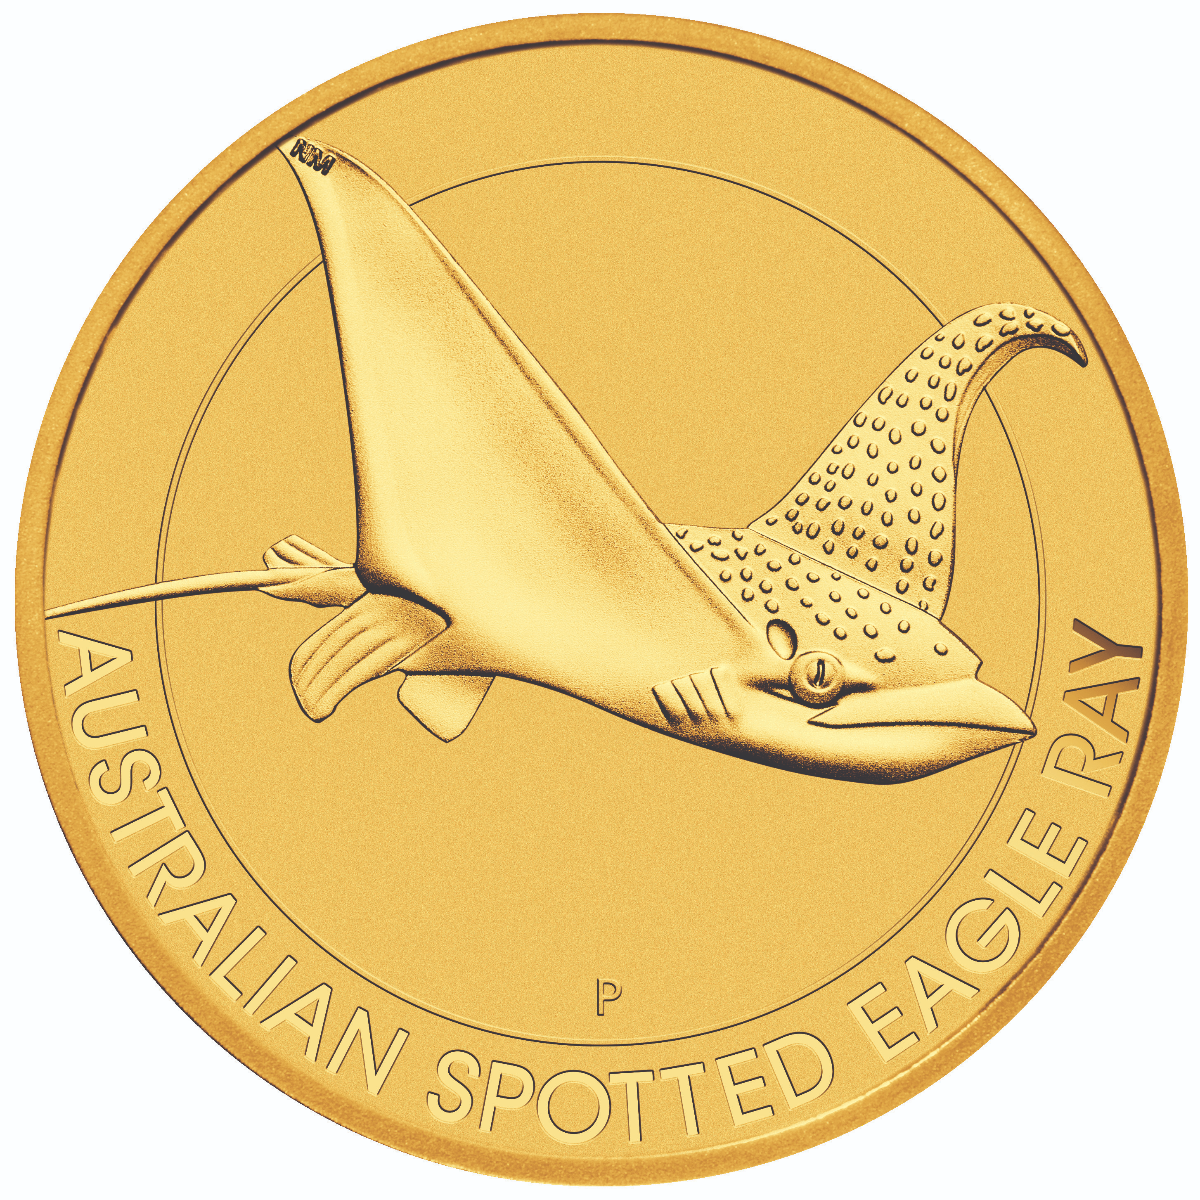   THE PERTH MINT - AUSTRALIAN SPOTTED EAGLE RAY 2021 1/4oz GOLD BULLION COIN